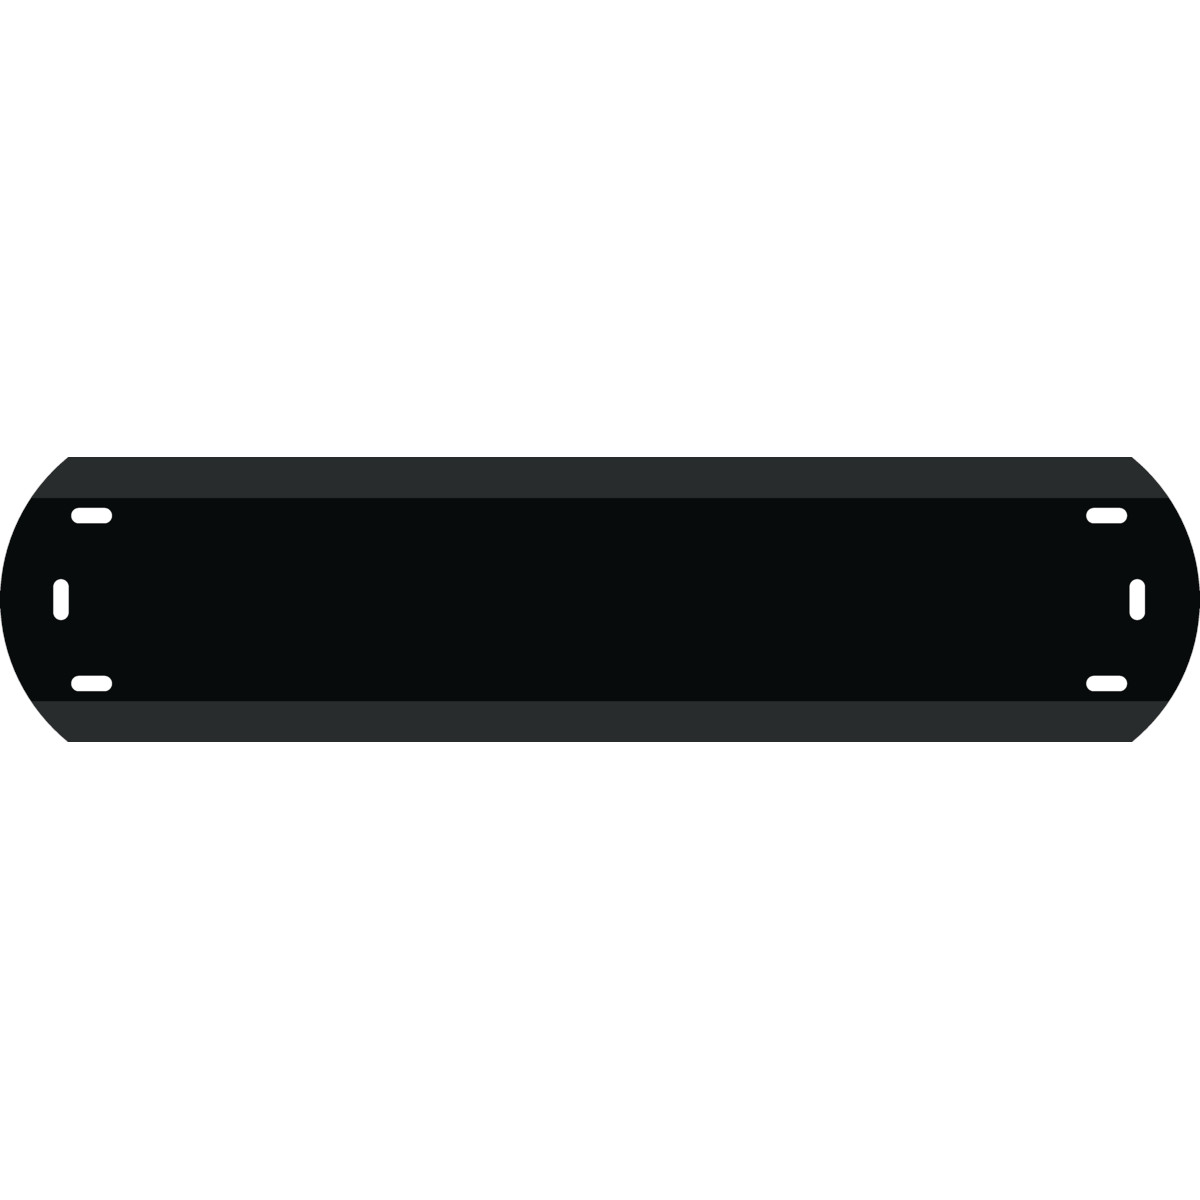 1" Character Polyethylene Holder - Fits 6 Characters